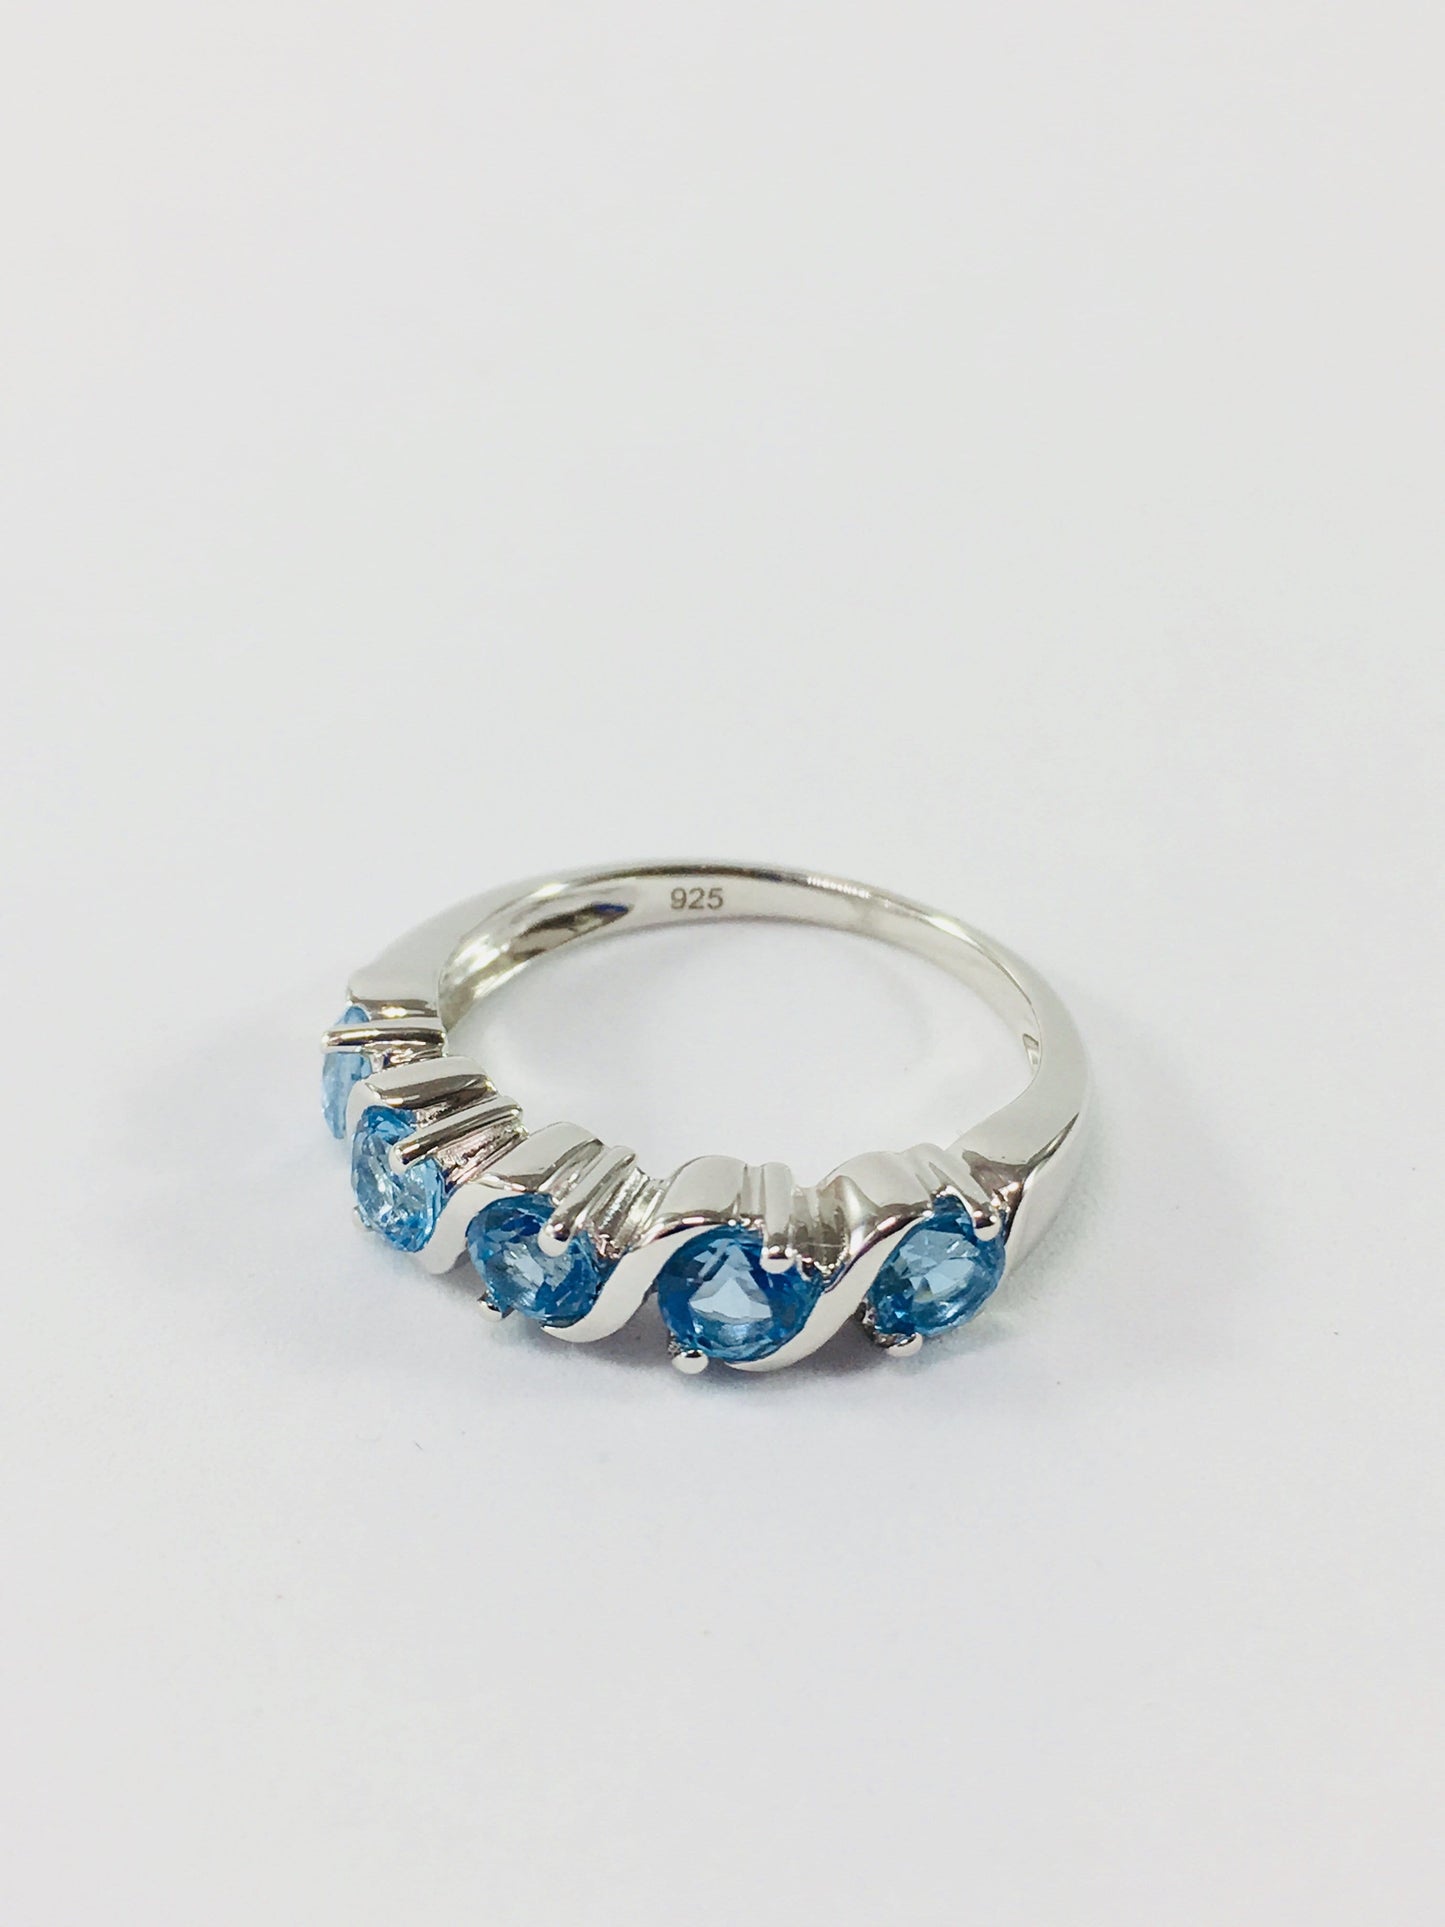 Blue Topaz And Sterling Silver Statement Ring